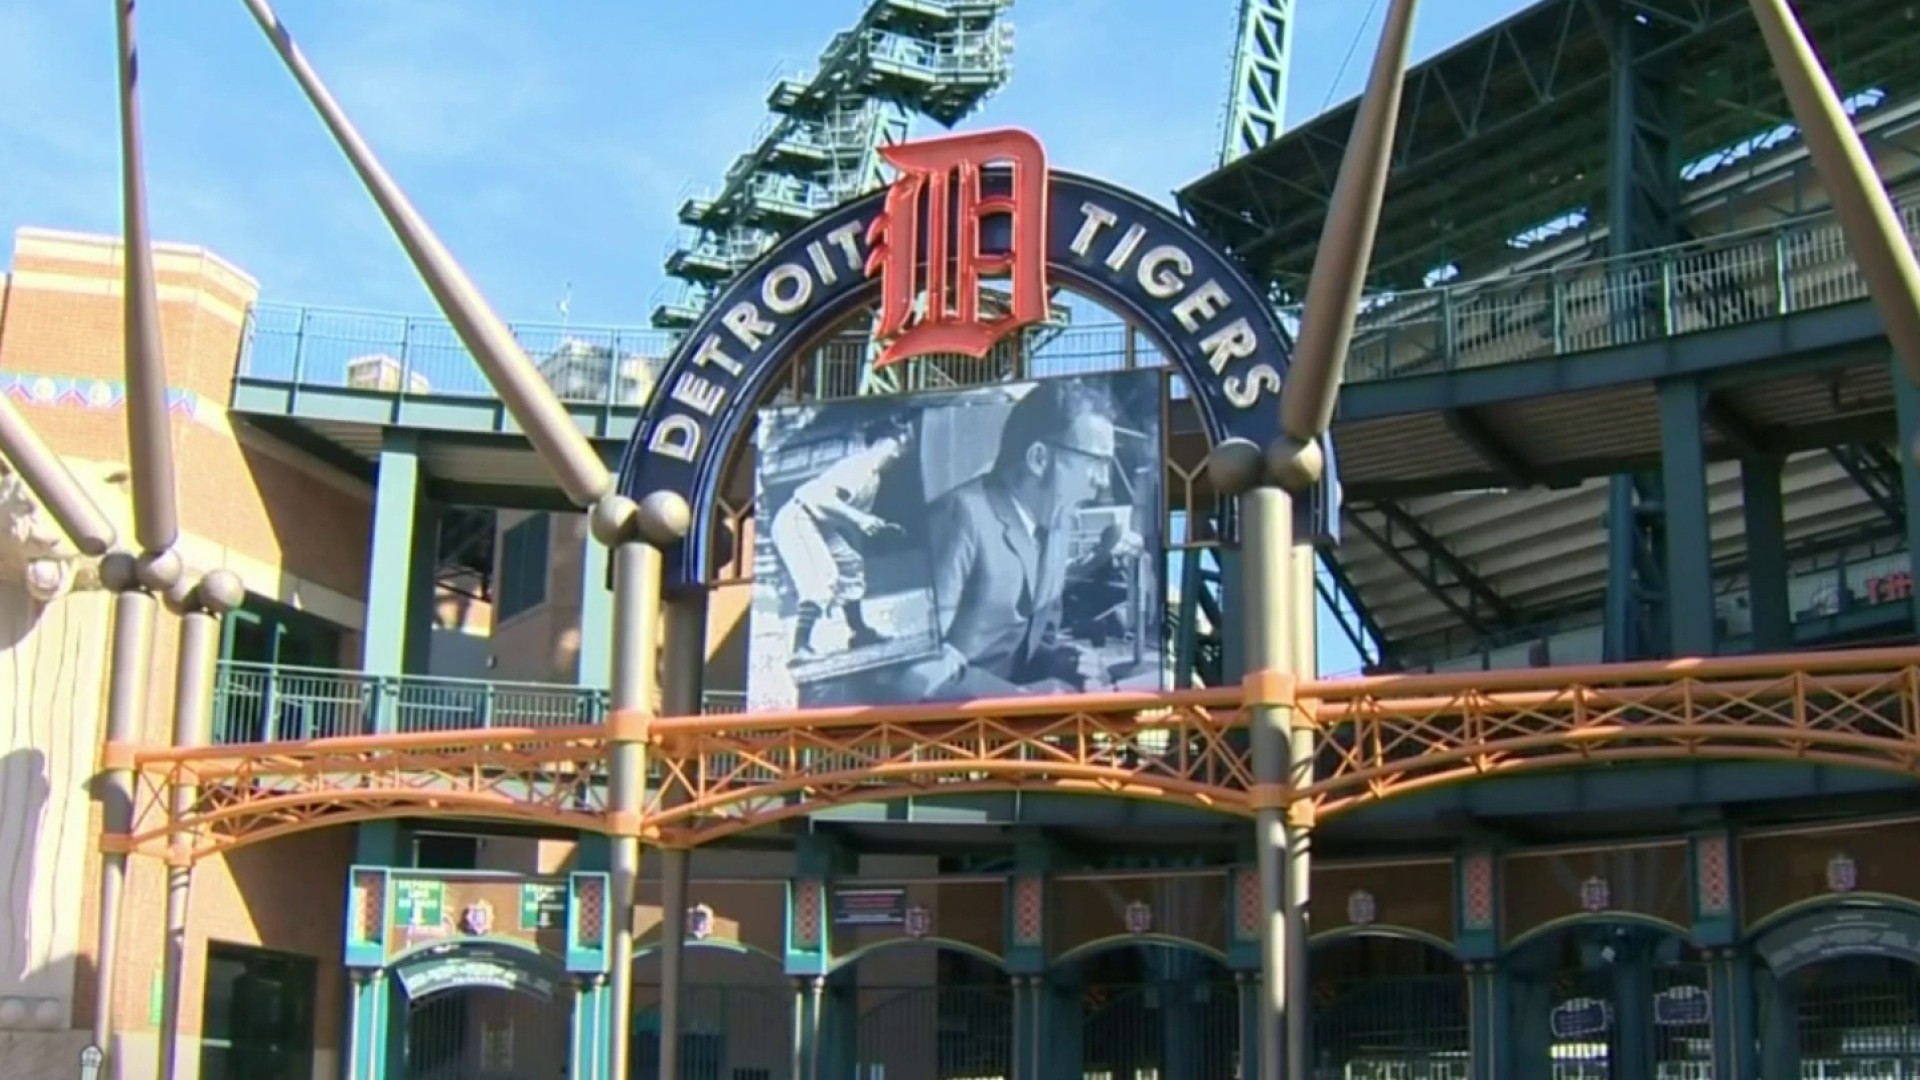 Tigers Opening Day 2021: Fans allowed in at Comerica Park